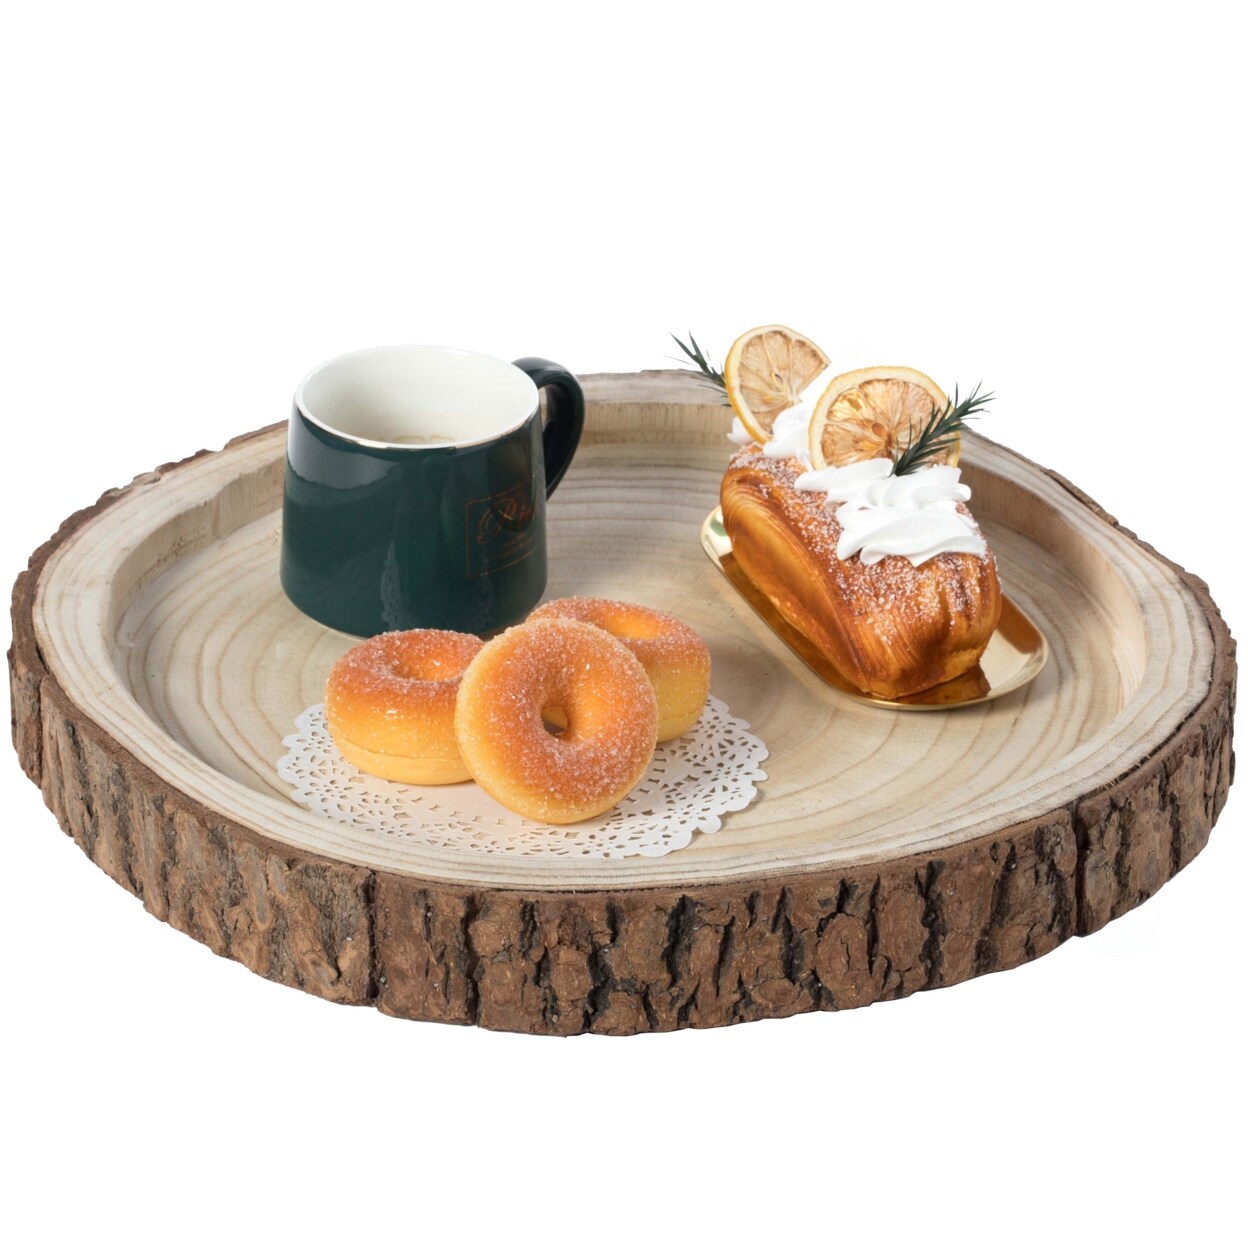 Vintiquewise Wood Tree Bark Indented Display Tray Serving Plate Platter Charger